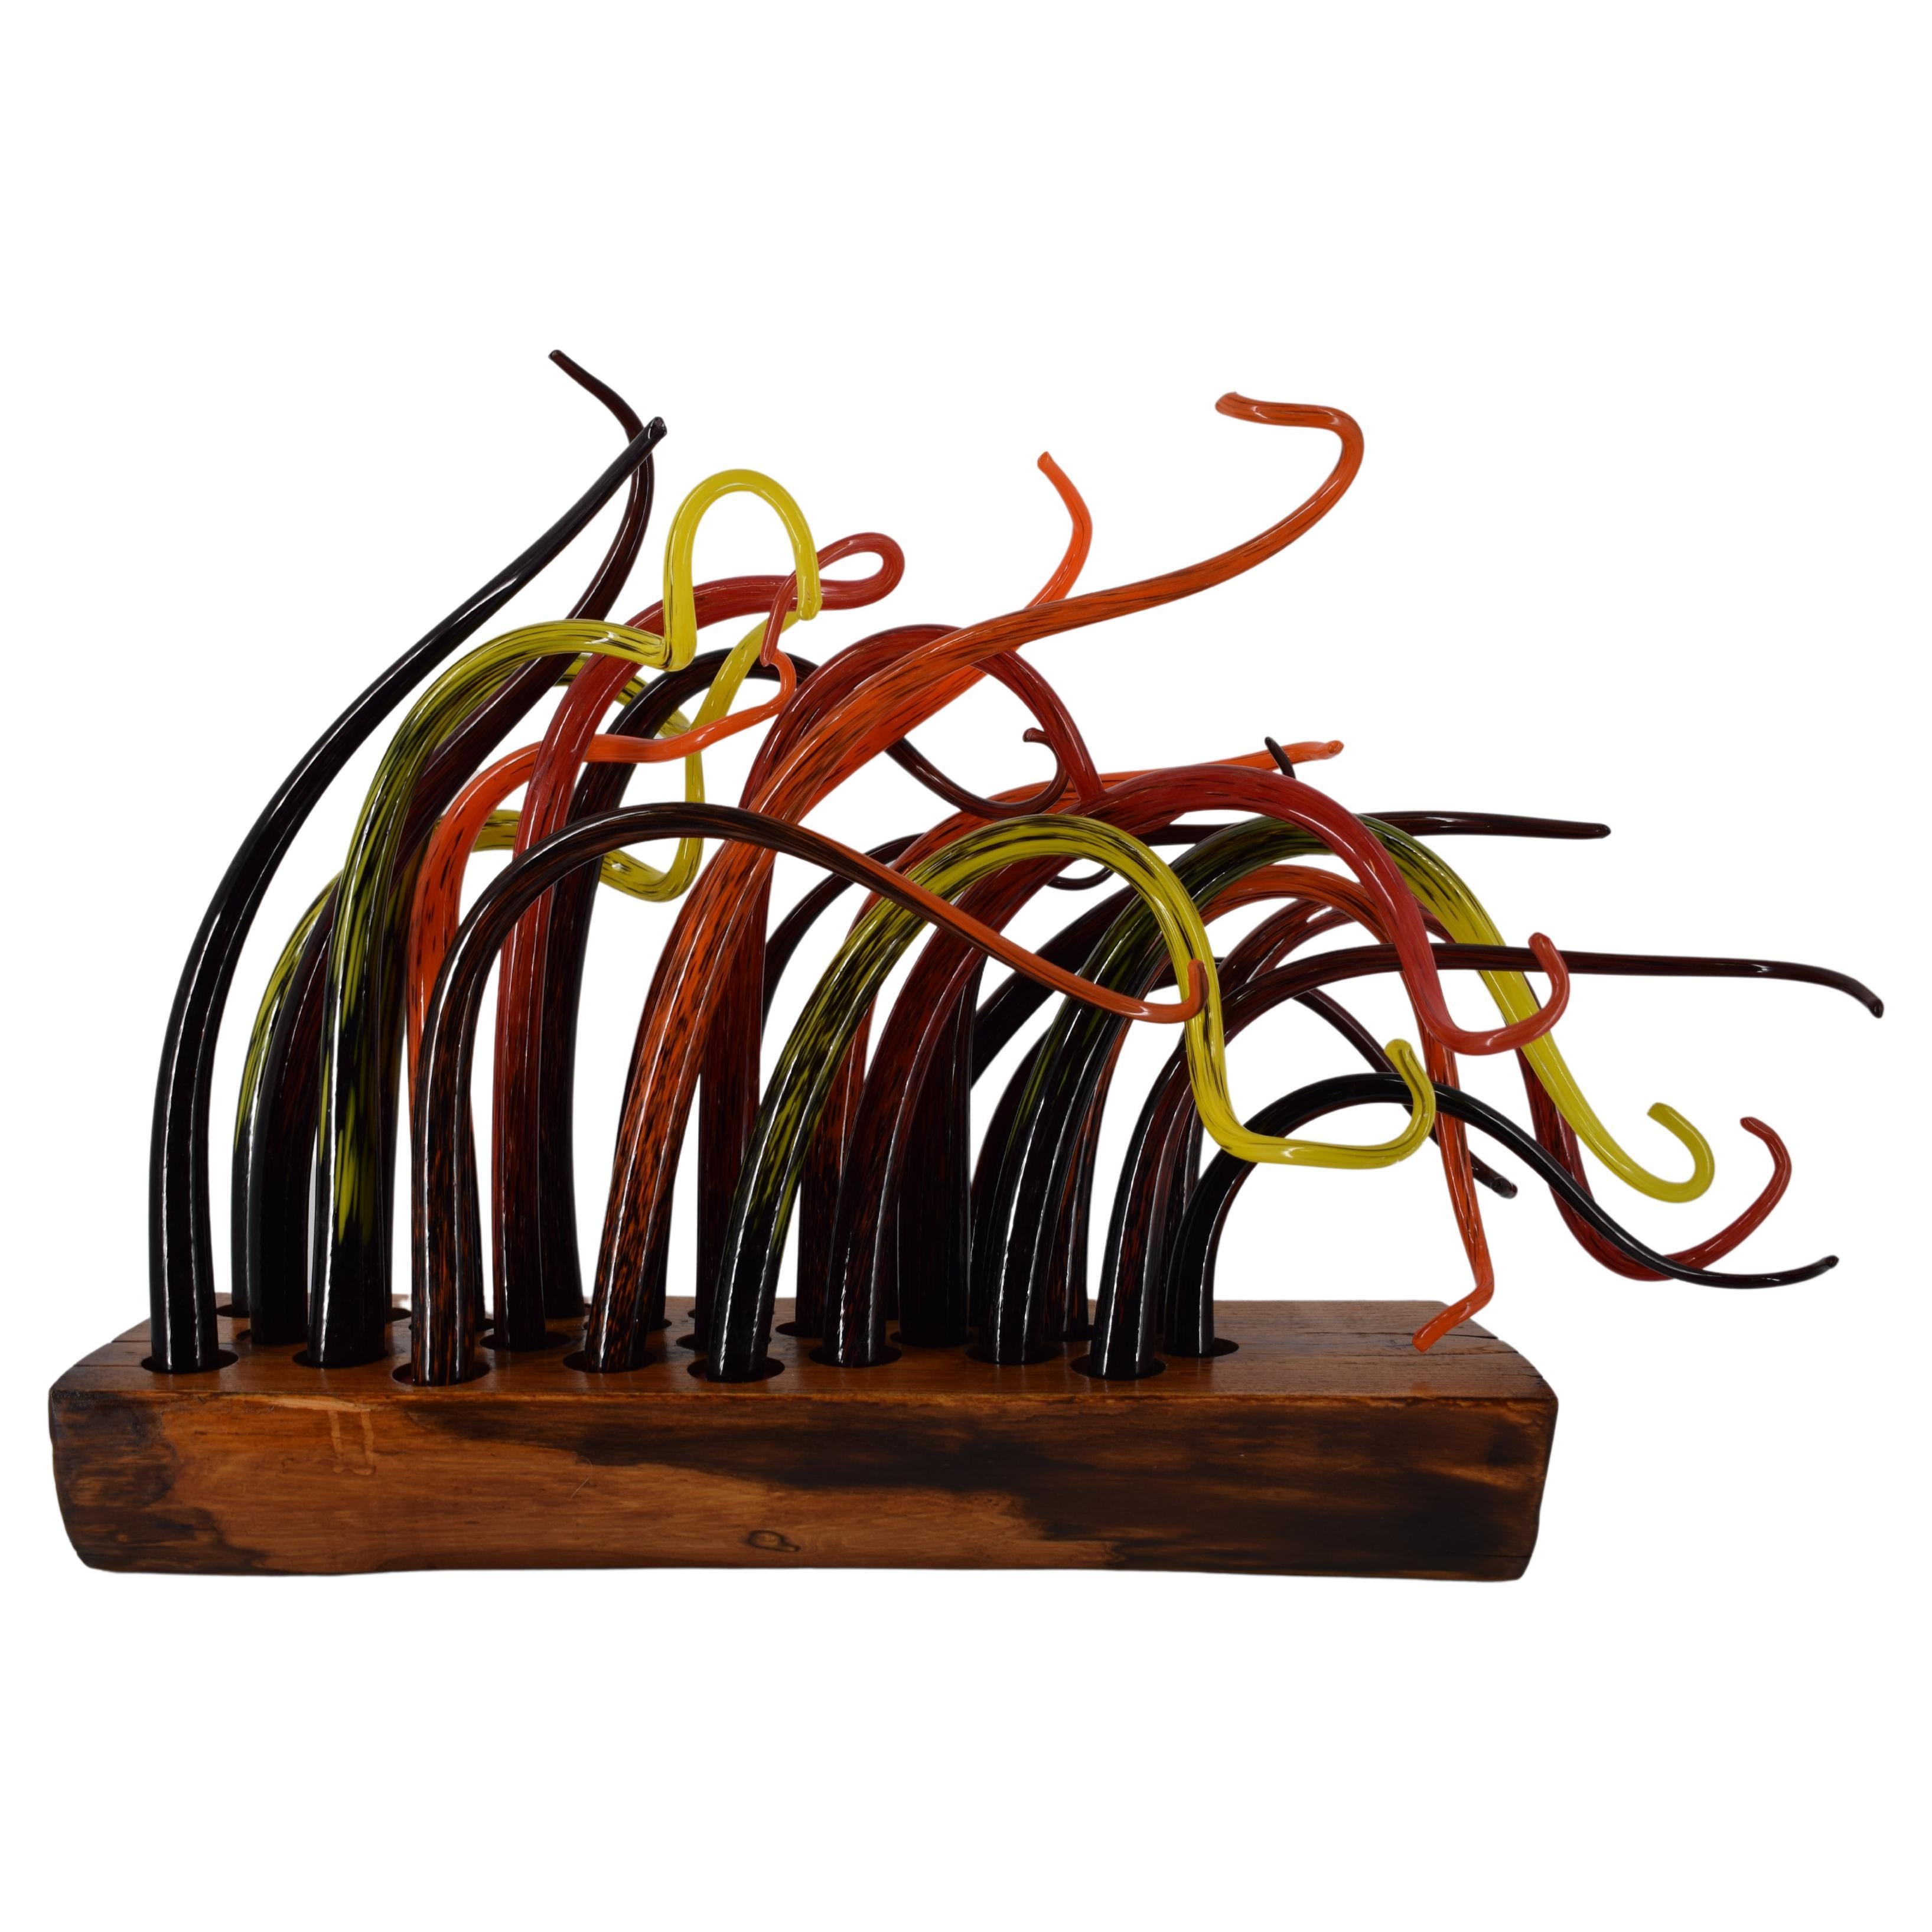 Murano artistic glass monolith. The Murano artistic glass sculpture is a creative and natural expression of the artist Eros Raffael, made of blown Murano glass and wood by Eros Raffael, in this sculpture are enclosed in perfect irregular shapes: the